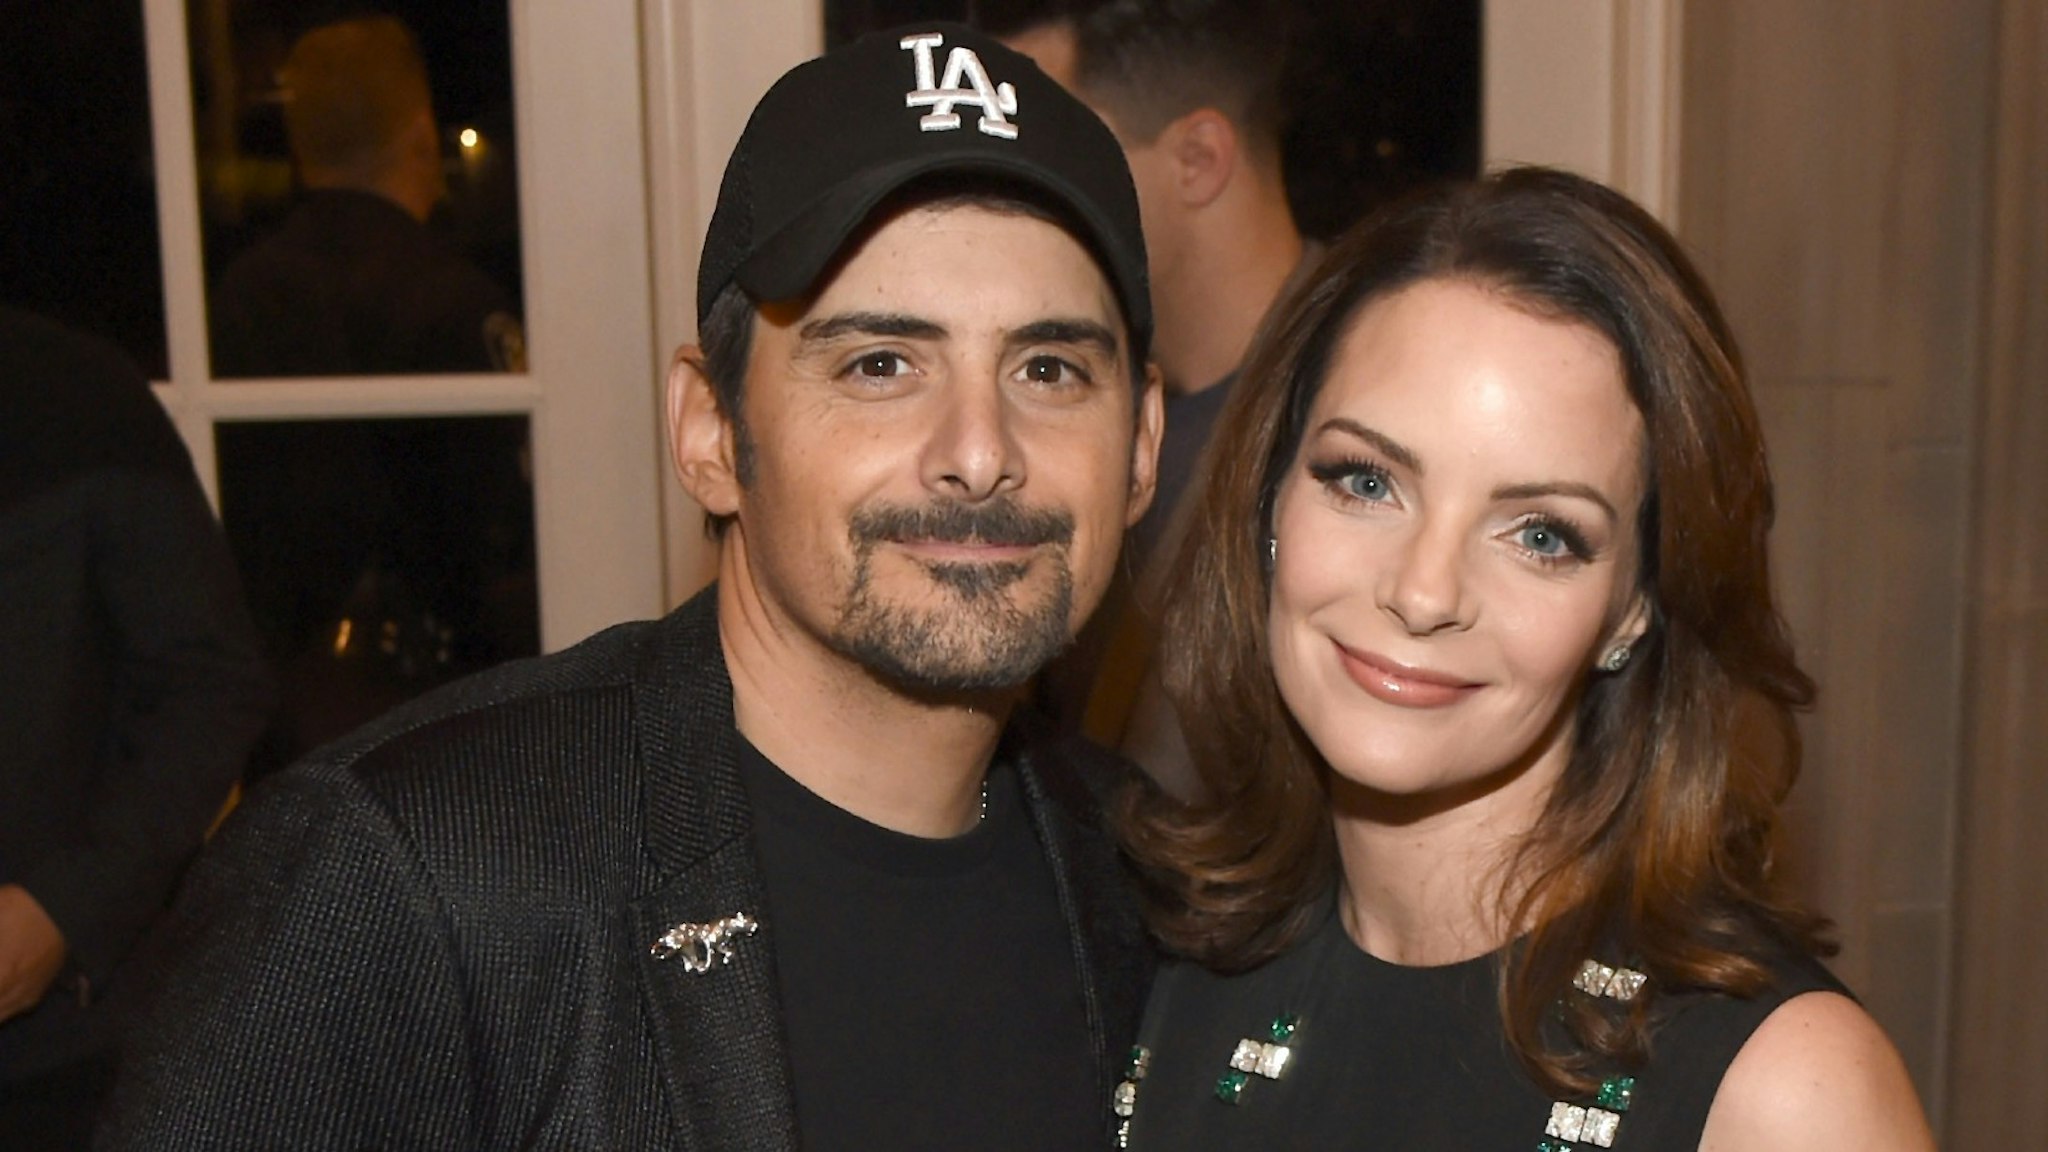 Singer-songwriter Brad Paisley and actress Kimberly Williams-Paisley attend ACM Lifting Lives featuring Little Big Town hosted and underwritten by Johnathon Arndt and Newman Arndt on November 16, 2017 in Nashville, Tennessee.